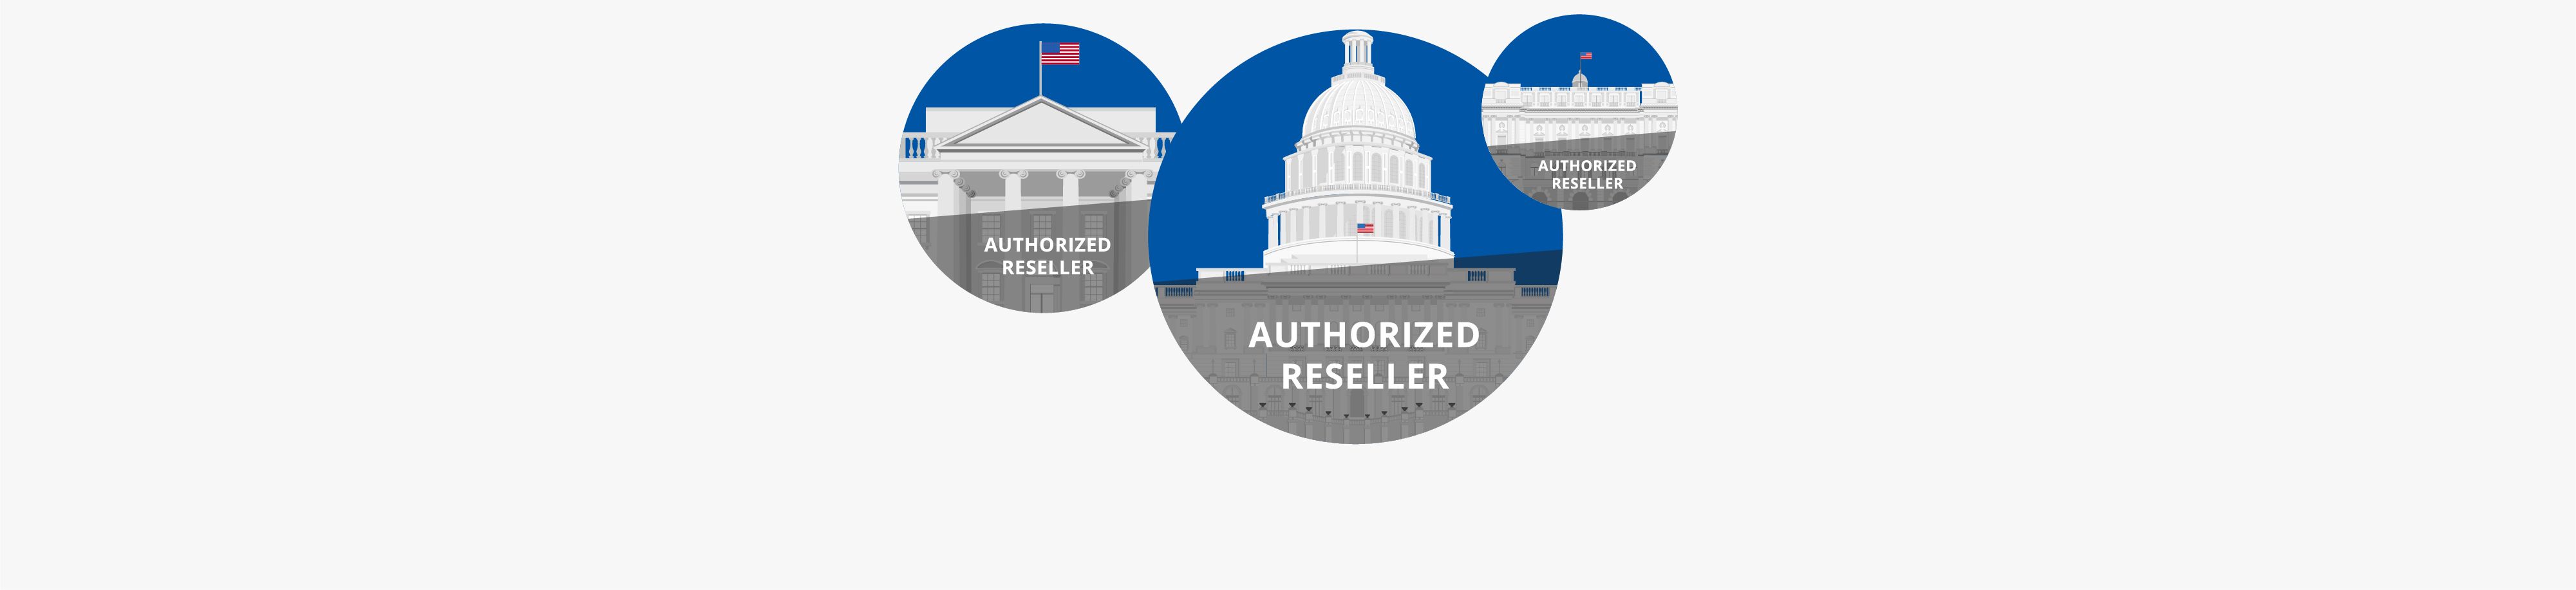 Authorized Reseller Contract With Carahsoft Enables Public Sector Support